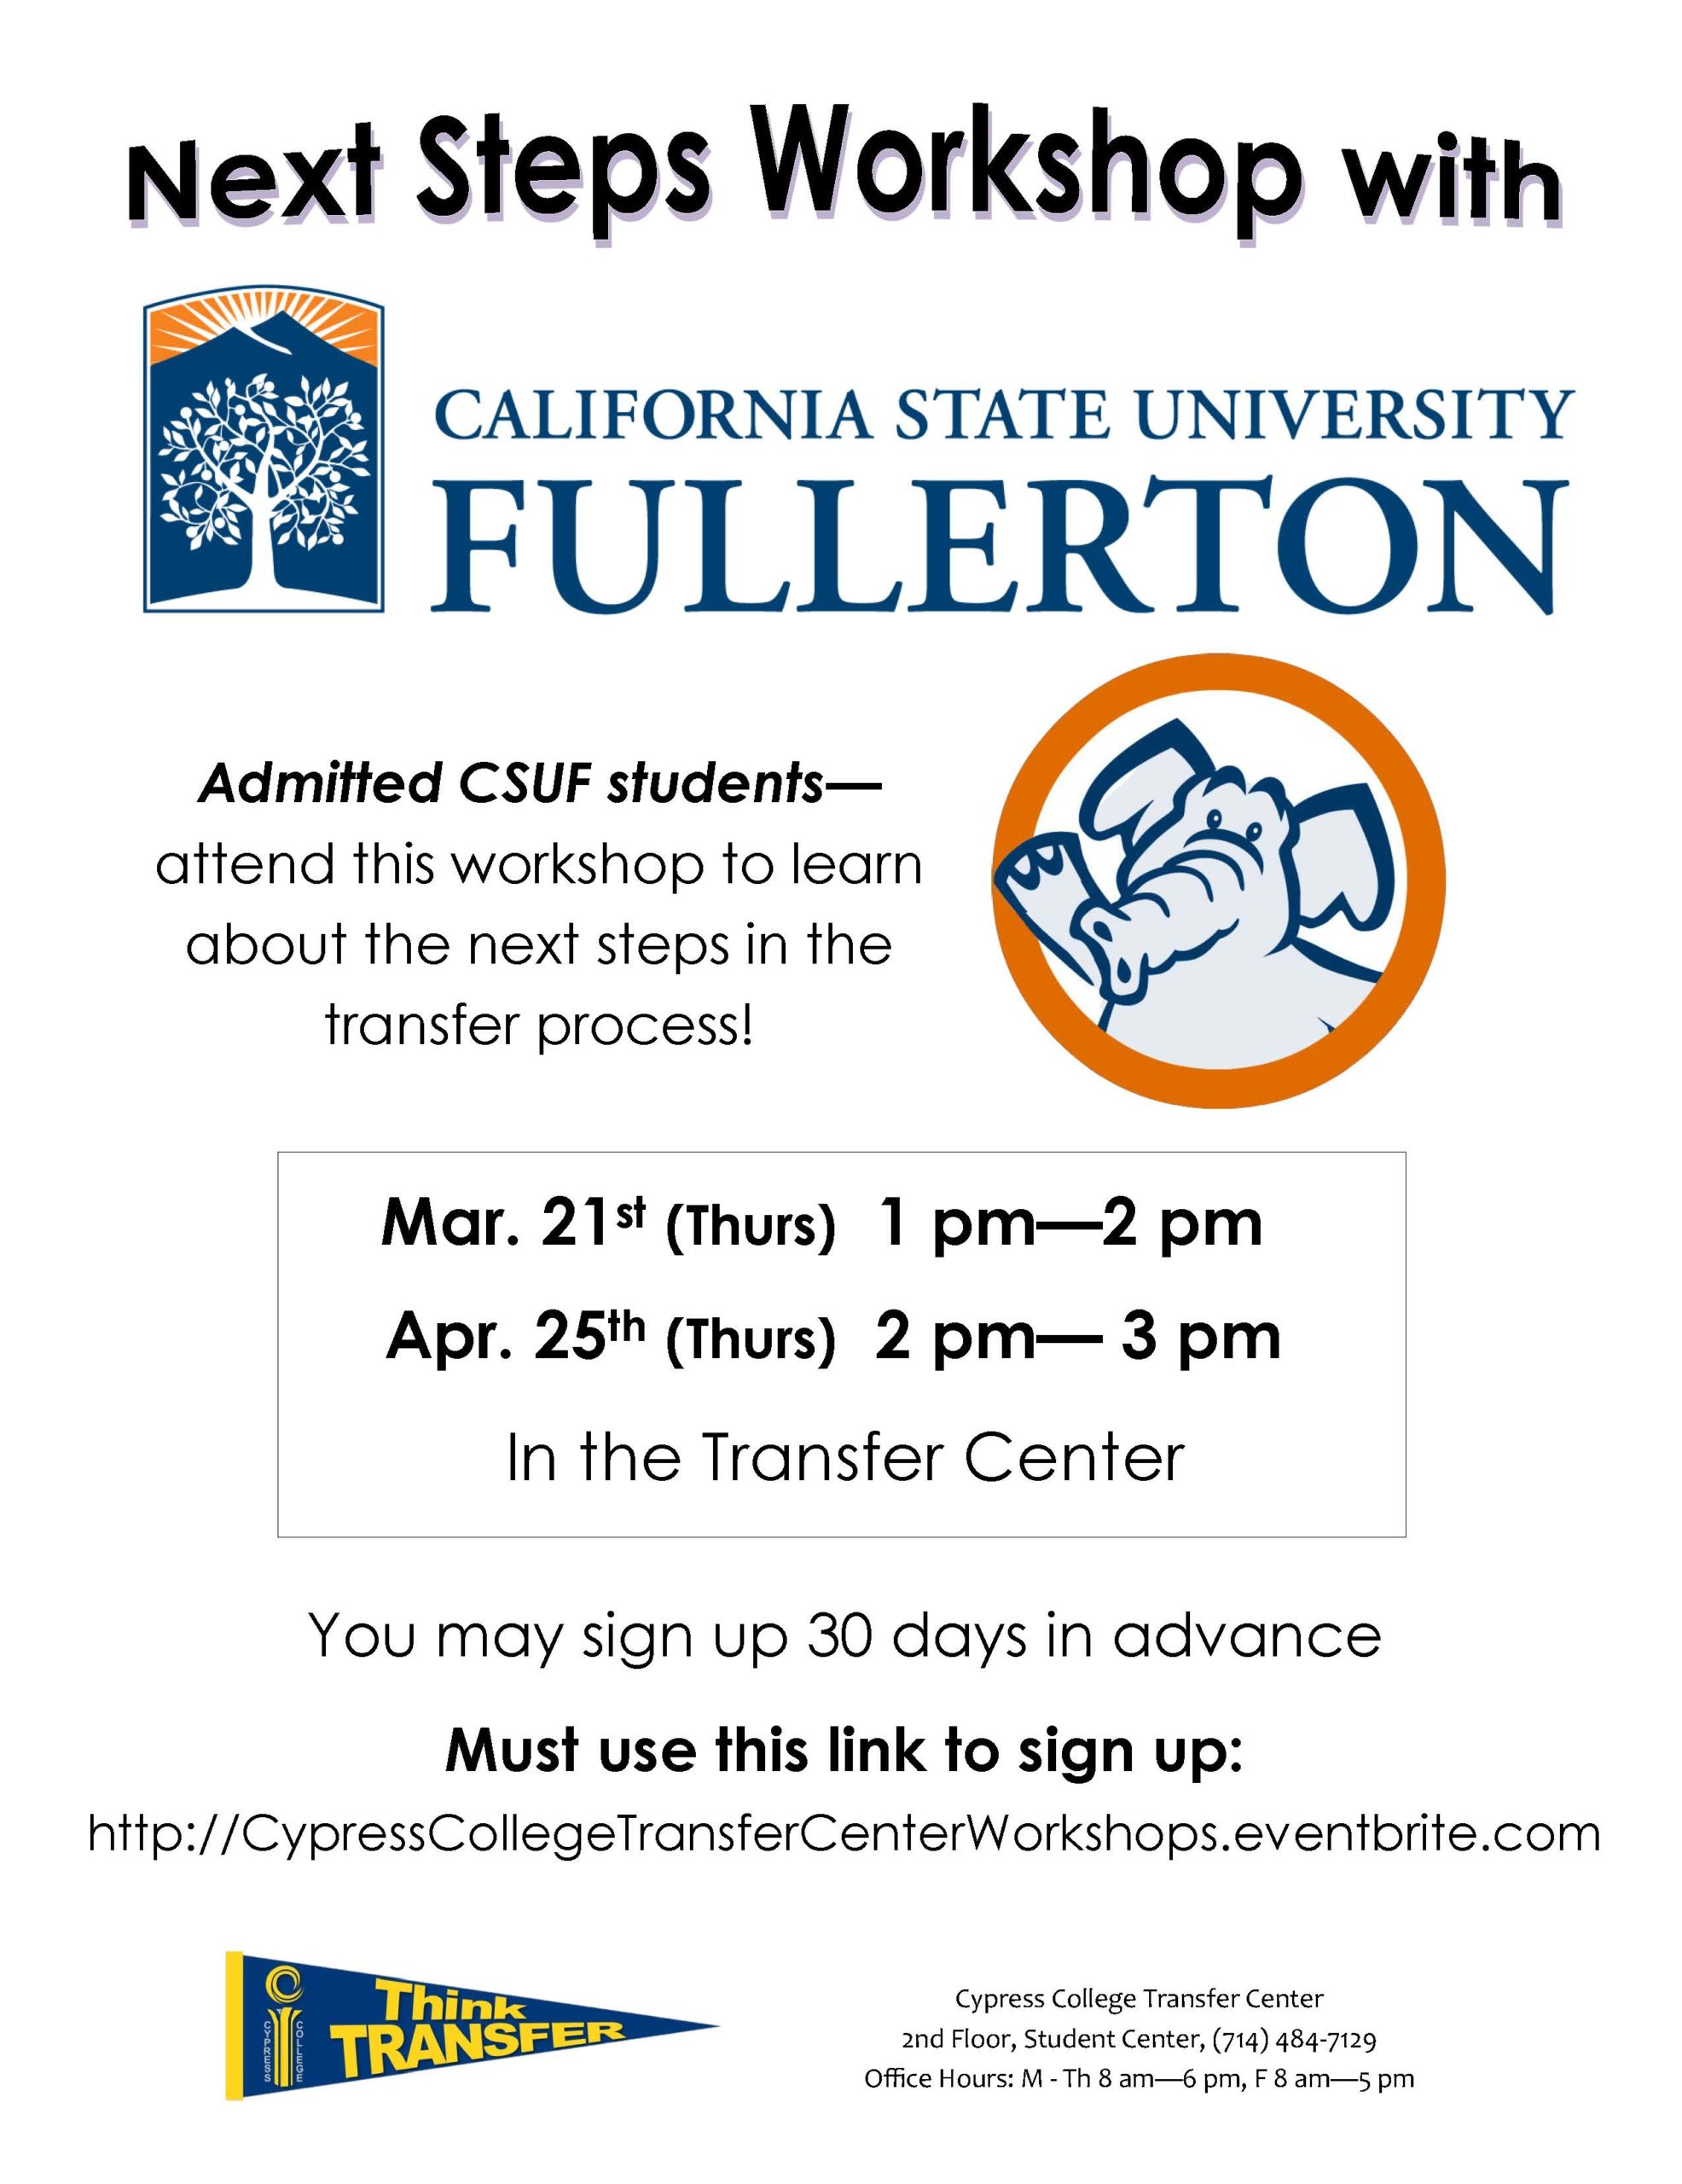 Next Steps Workshop with California State University Fullerton